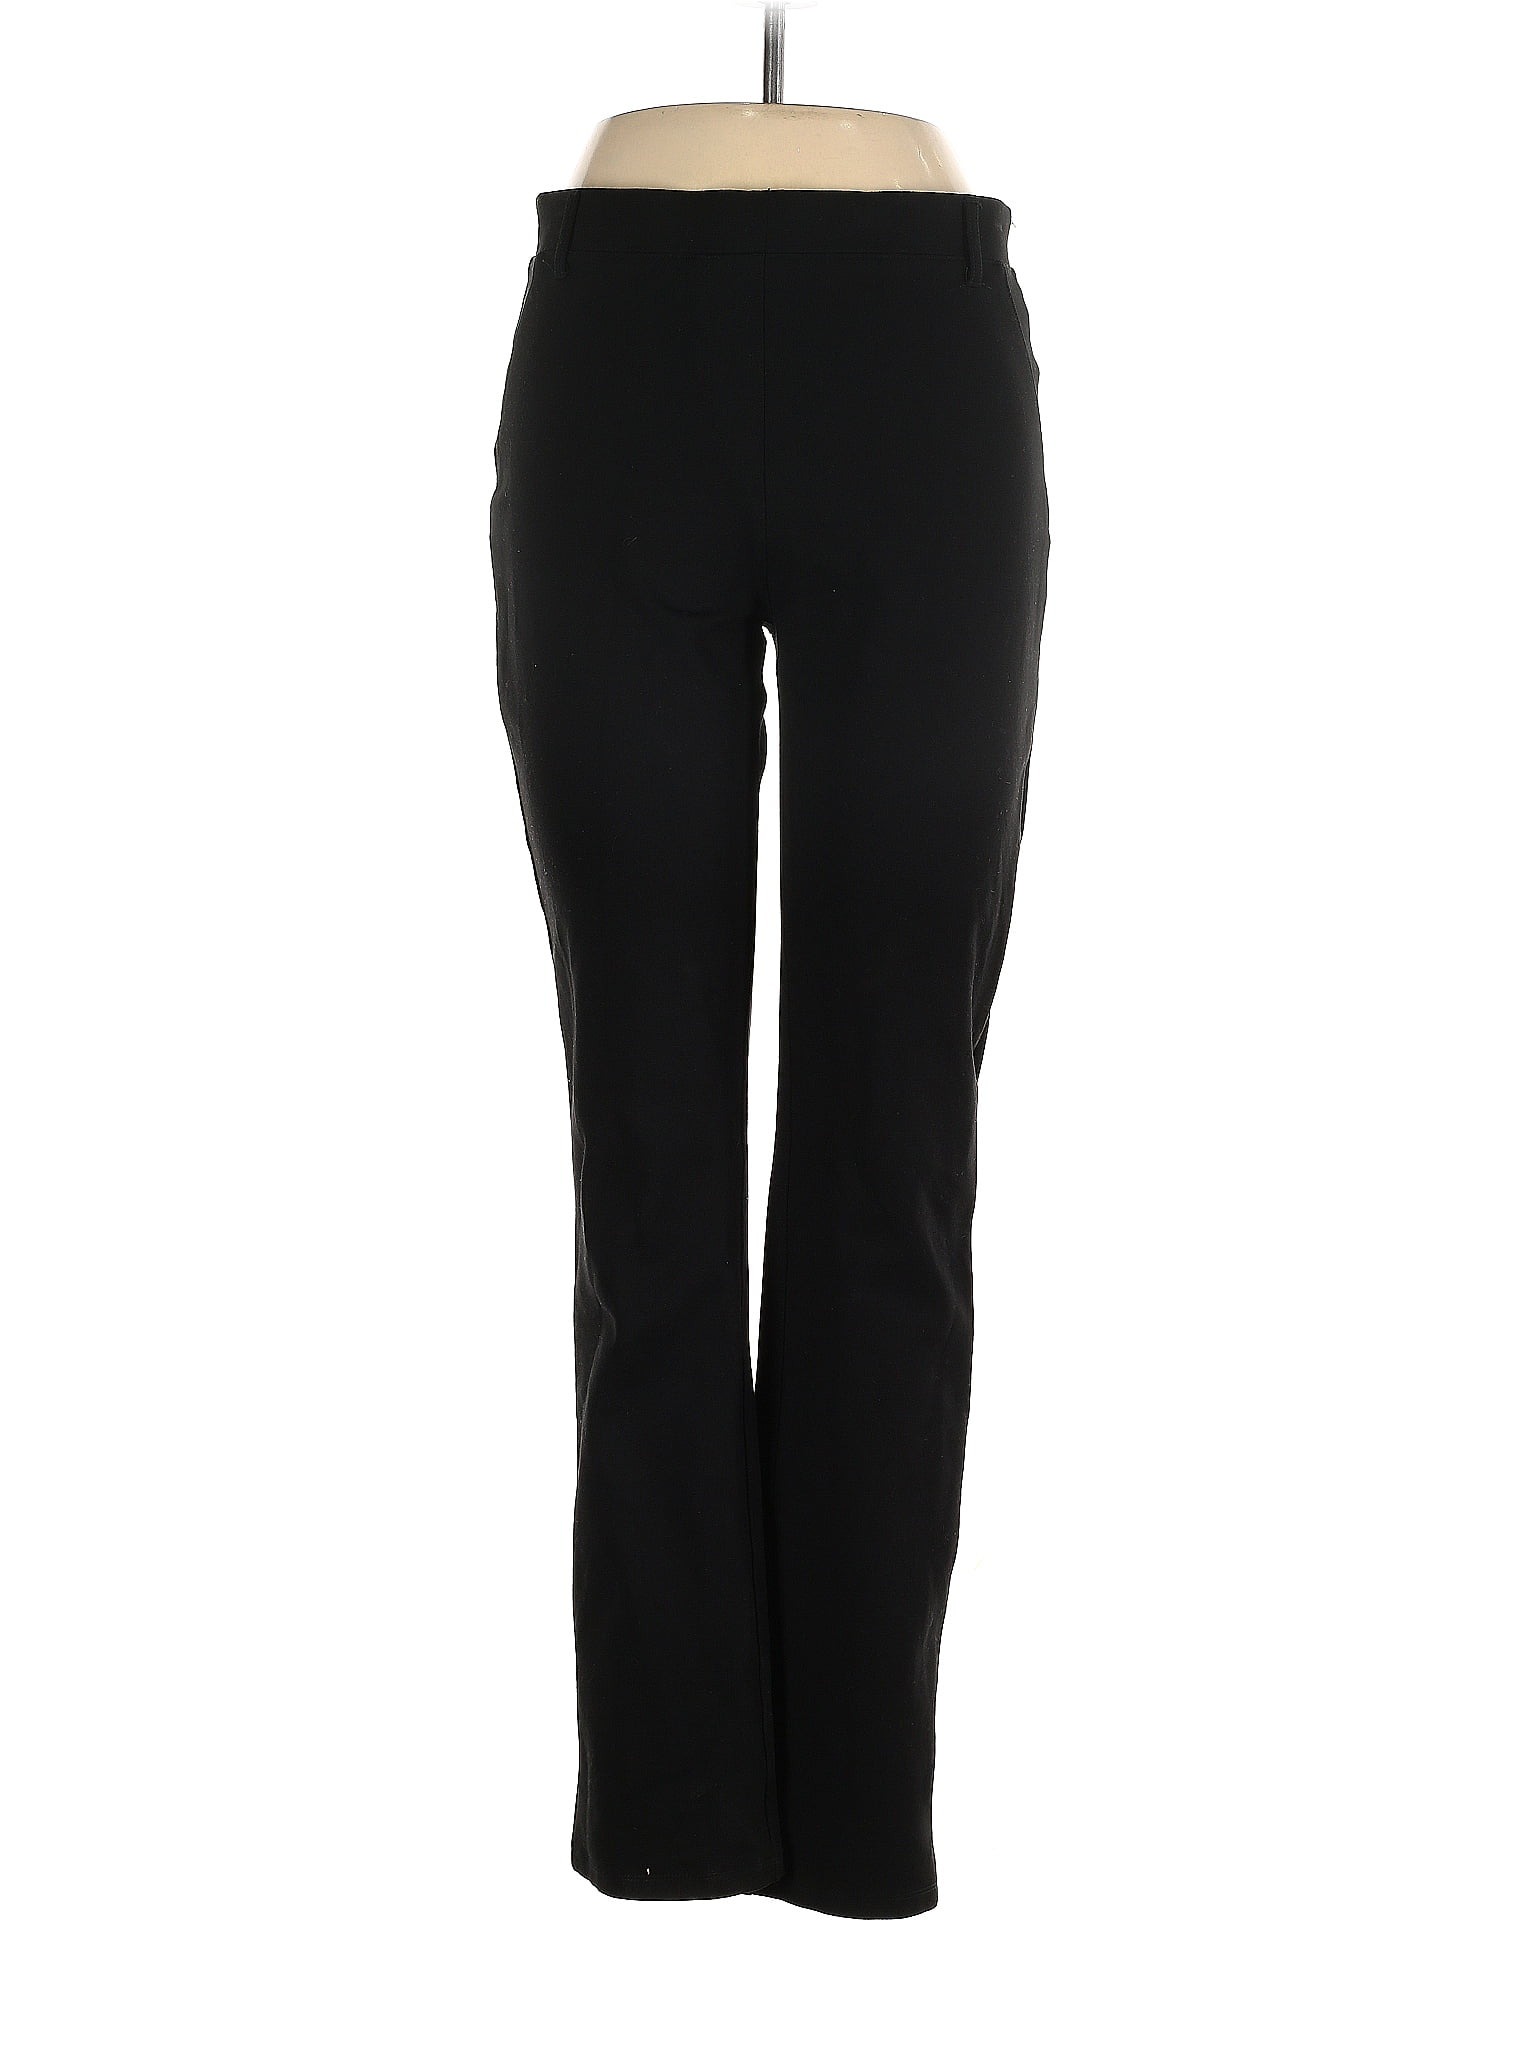 Quince Black Casual Pants Size M - 56% off